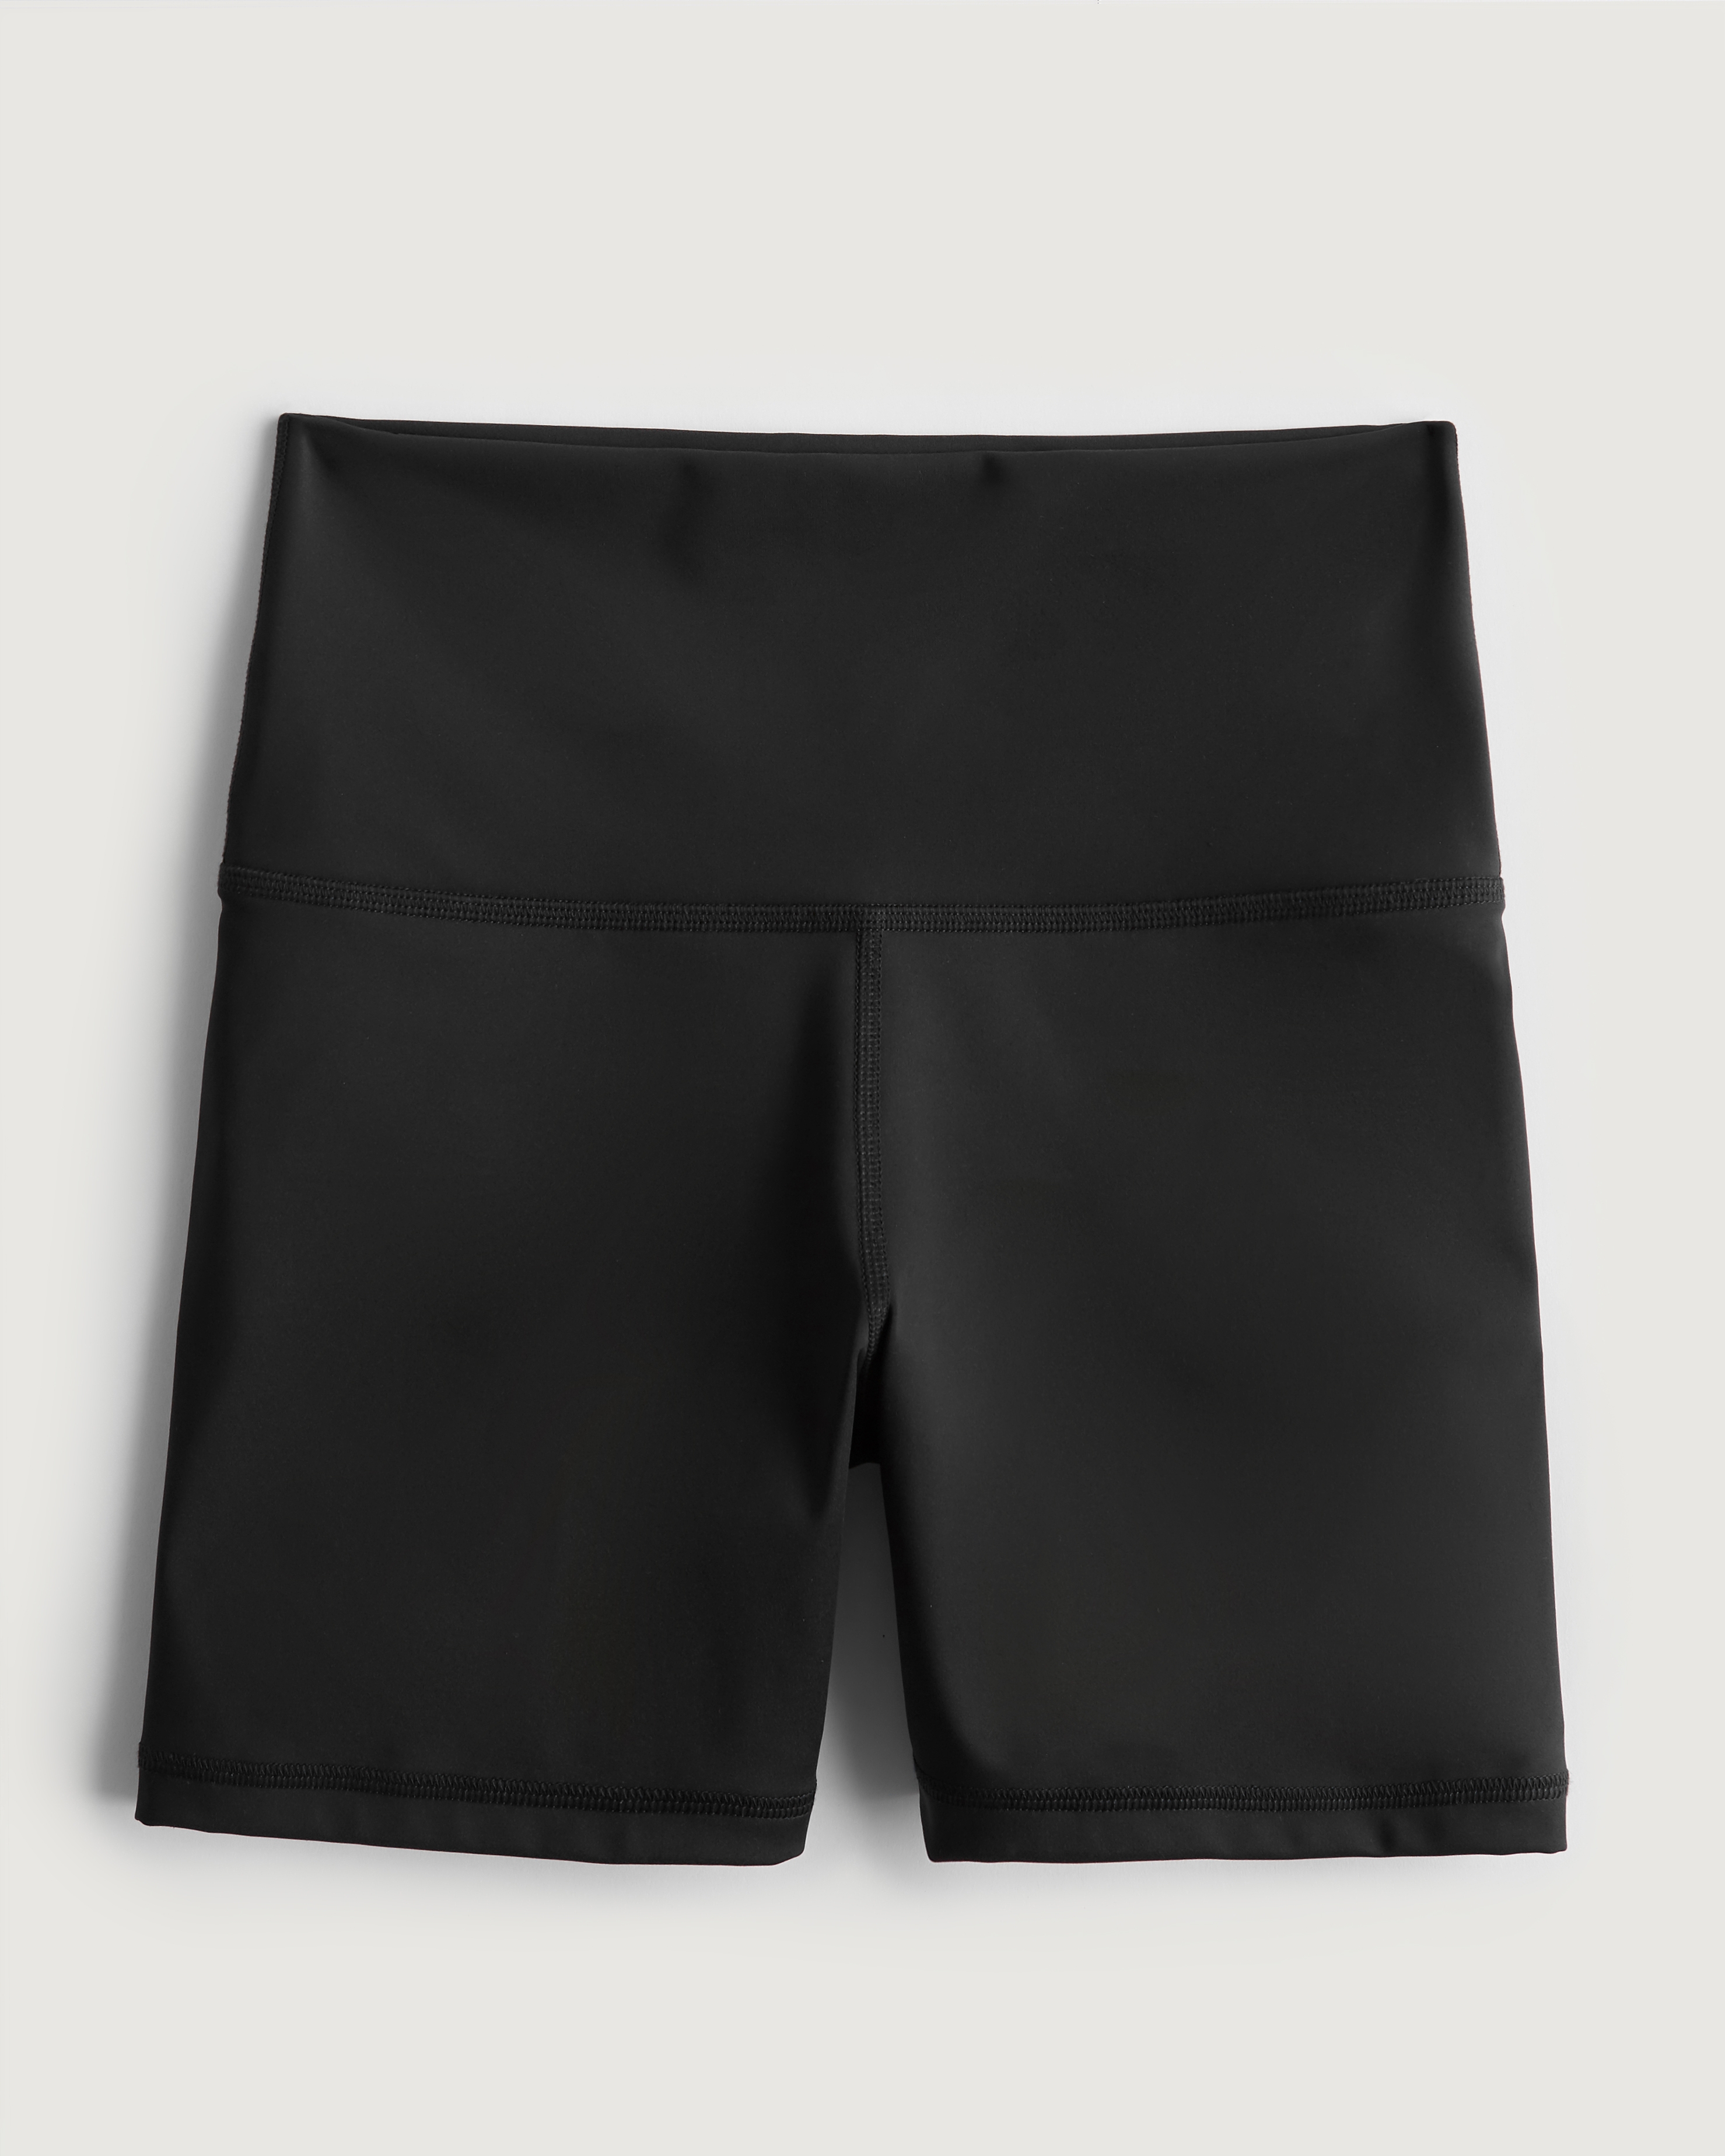 Gilly Hicks Active Energize High-Rise Bike Shorts 5"